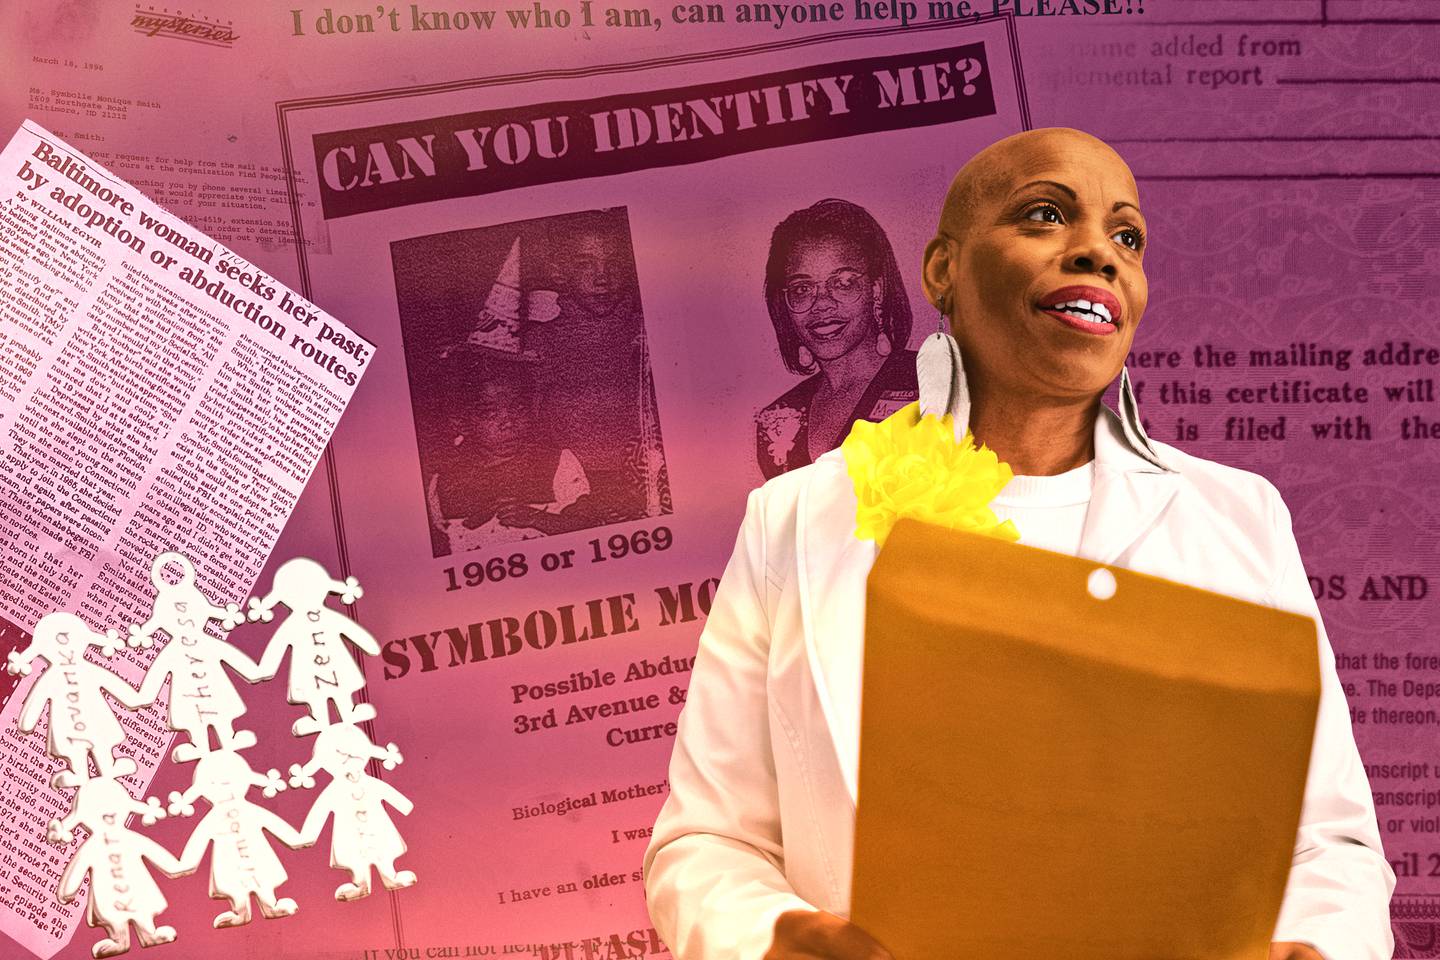 Monique Smith promised herself years ago that she won’t be buried as Jane Doe. After decades of search, she finally found her answer.